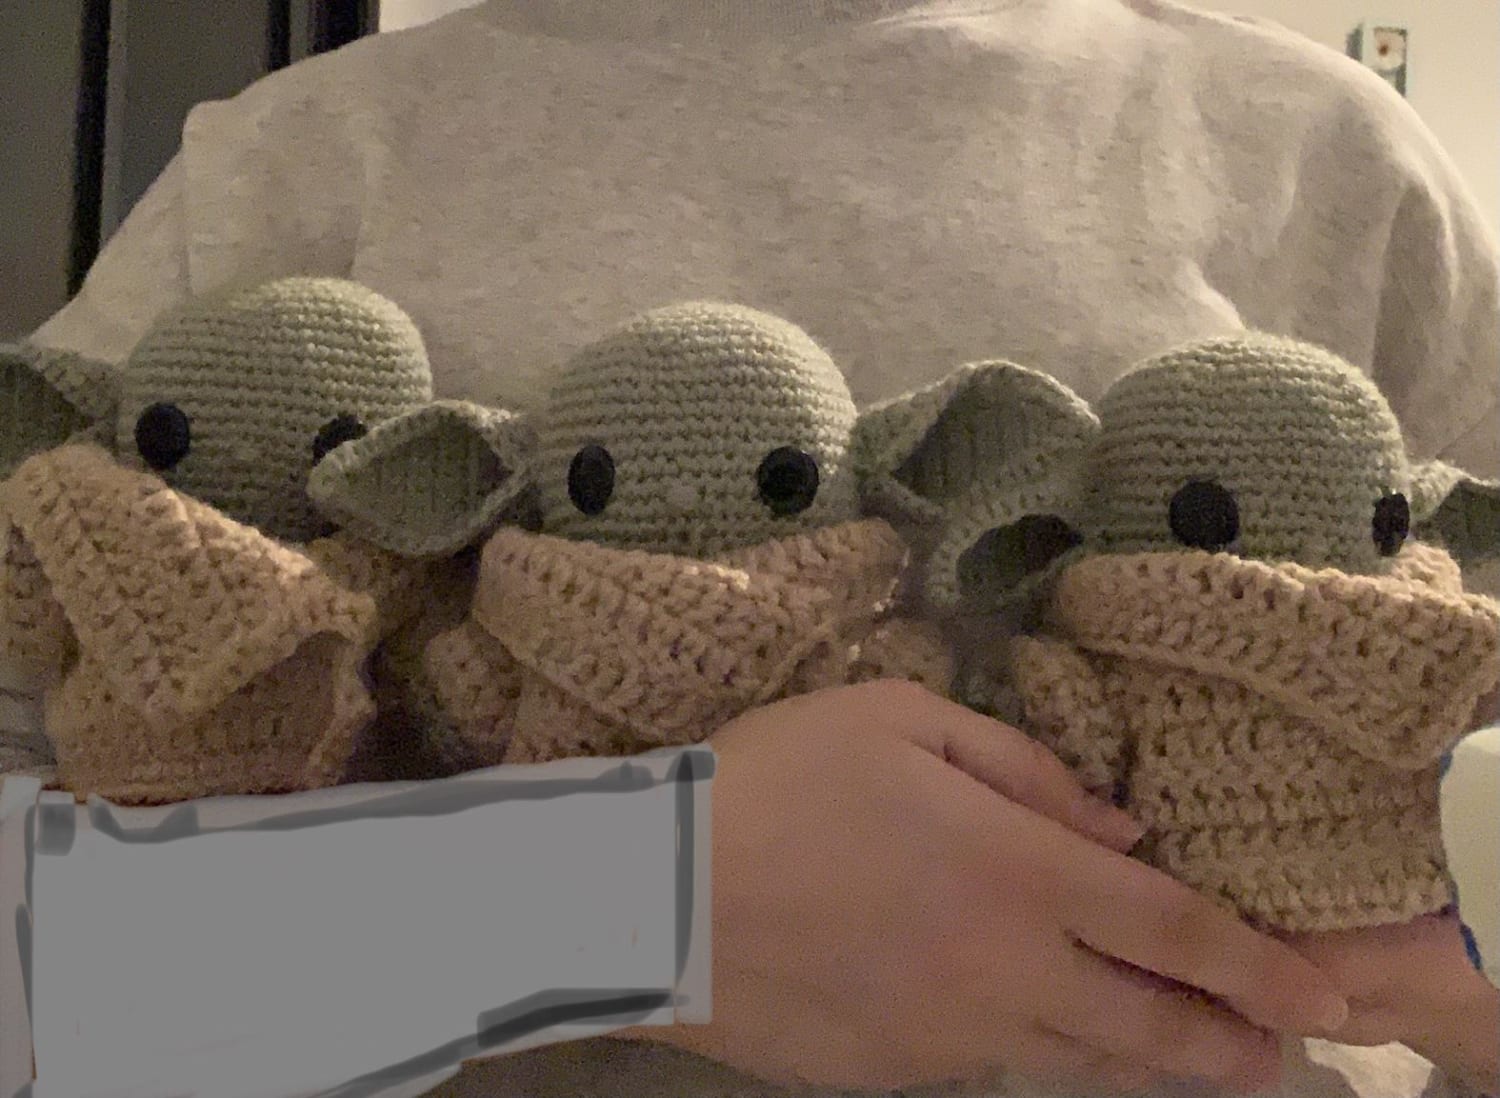 I cranked out these baby Yoda’s in a week as gifts 😅 (excuse my drawn on sleeve, I wear a hijab and don’t show my arms, and my sleeves were pulled up)